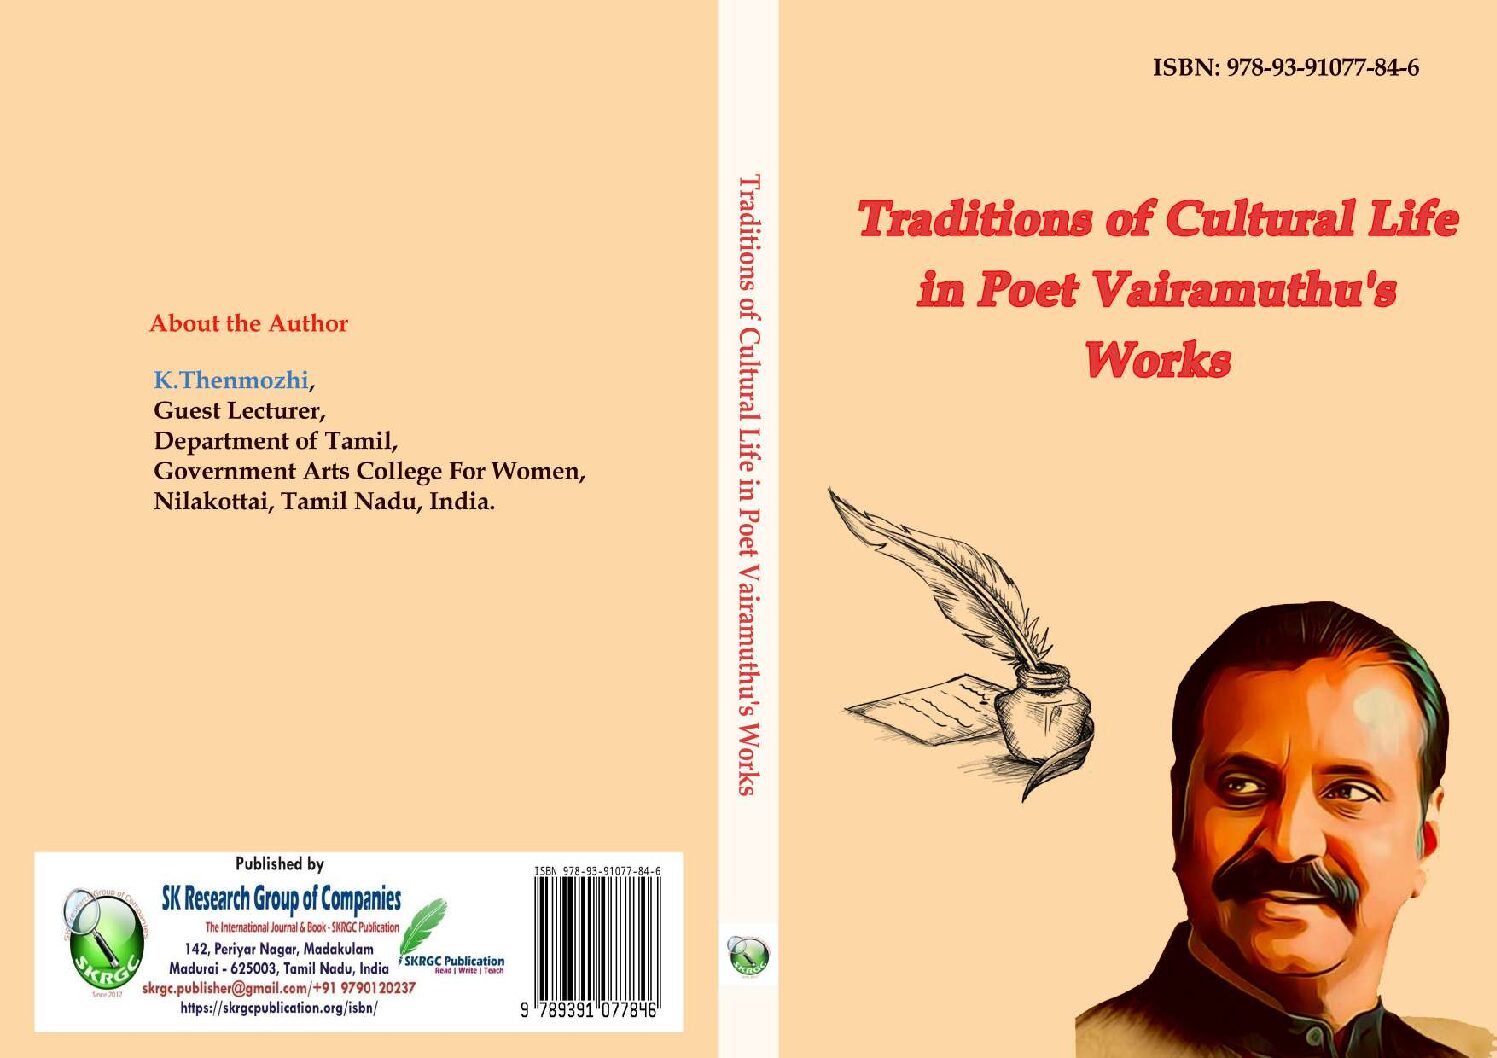 Traditions of Cultural Life in Poet Vairamuthu’s Works